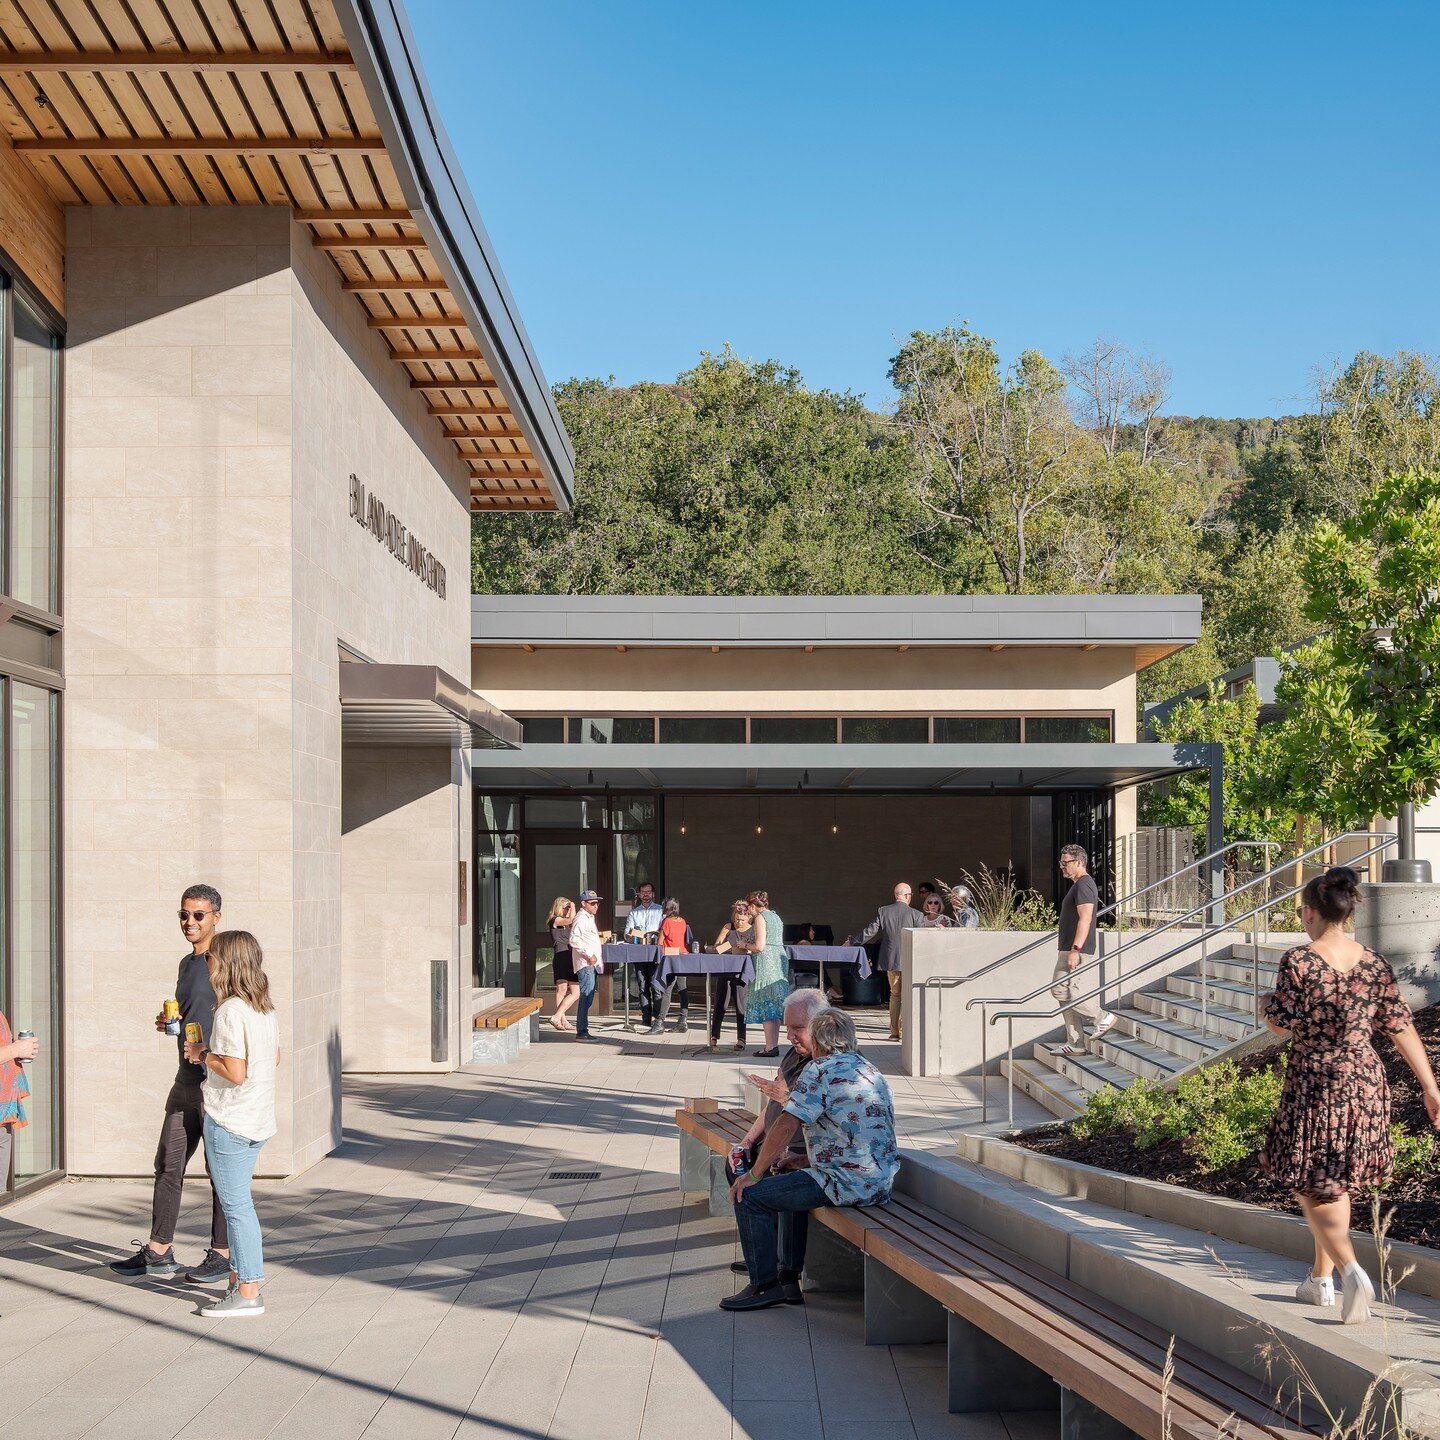 Situated amongst beautiful natural foothills, the Jonas Center provides open, inviting indoor and outdoor spaces for both small and large gatherings on the College of Marin Indian Valley Campus. A partnership between the College of Marin and the Mari